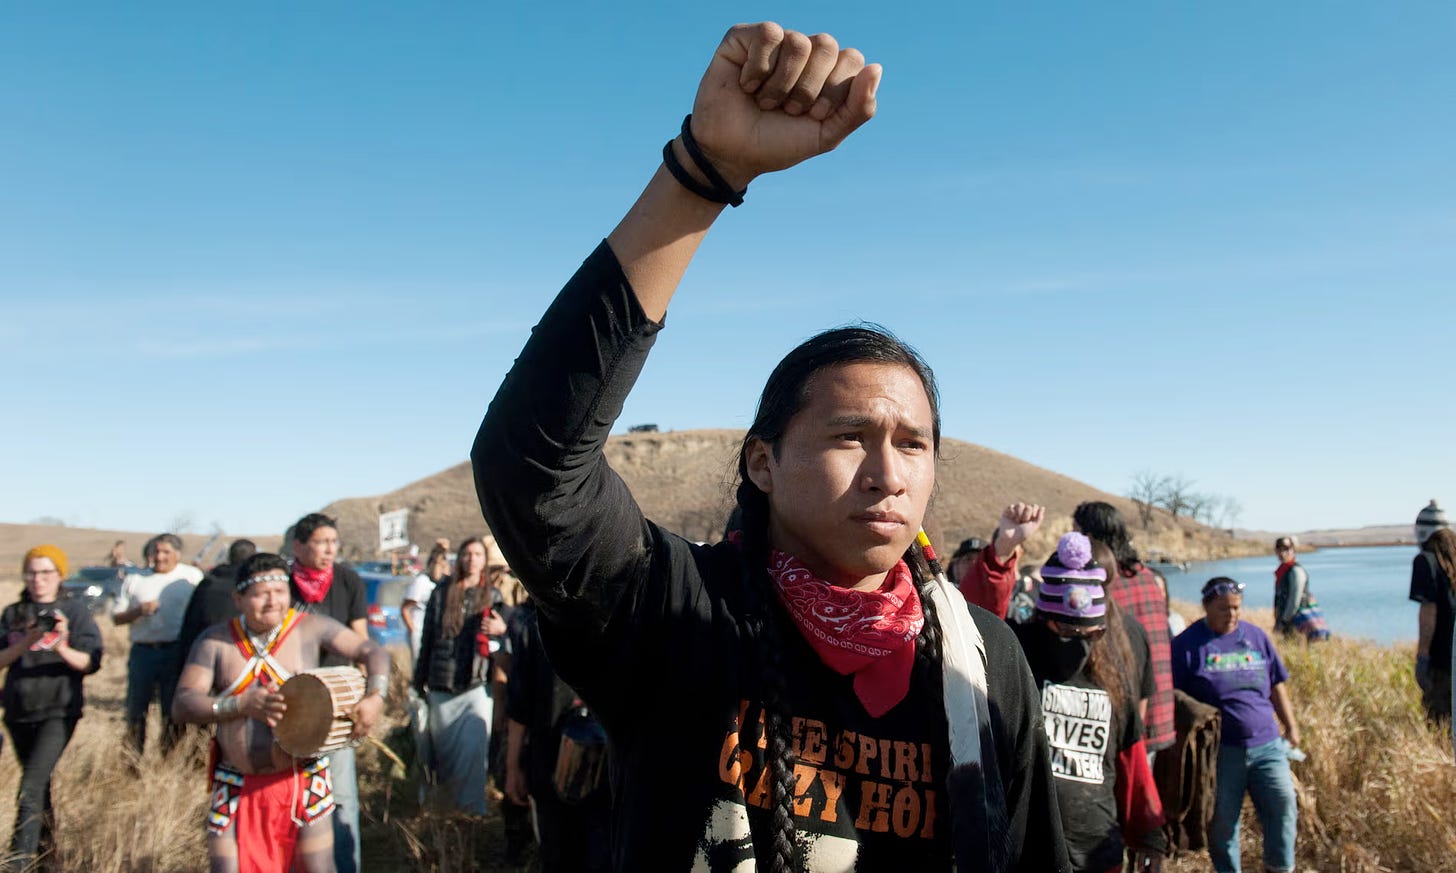 Sioux protestors, young man lightly clenched hand in air in solidarity.